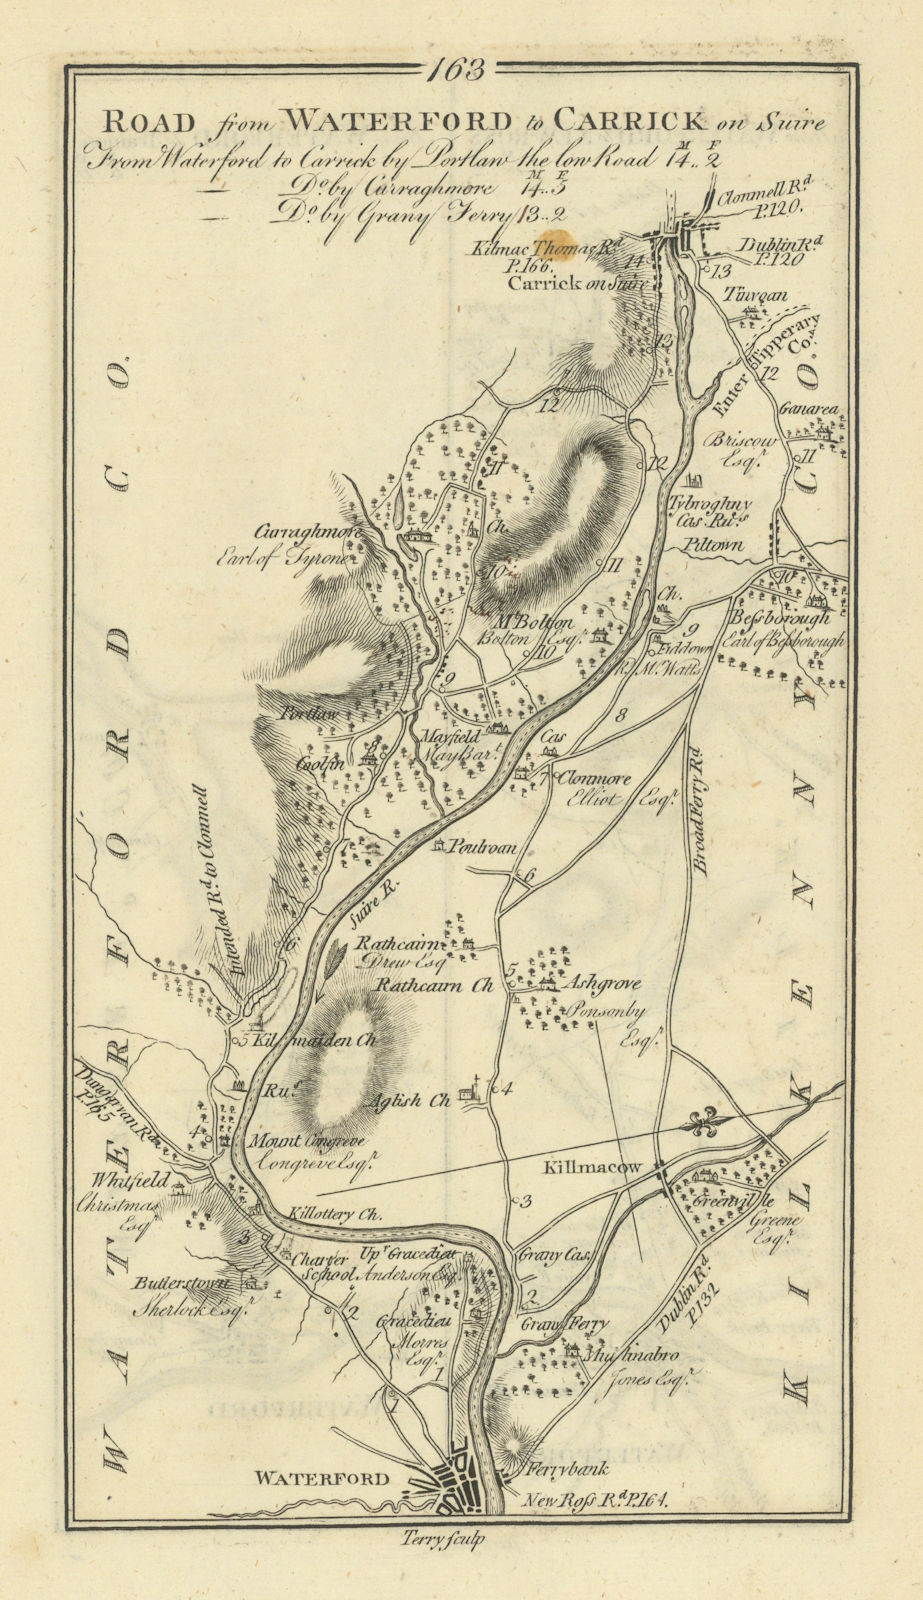 Associate Product #163 Waterford to Carrick-on-Suir. Kilmacow Kilkenny. TAYLOR/SKINNER 1778 map